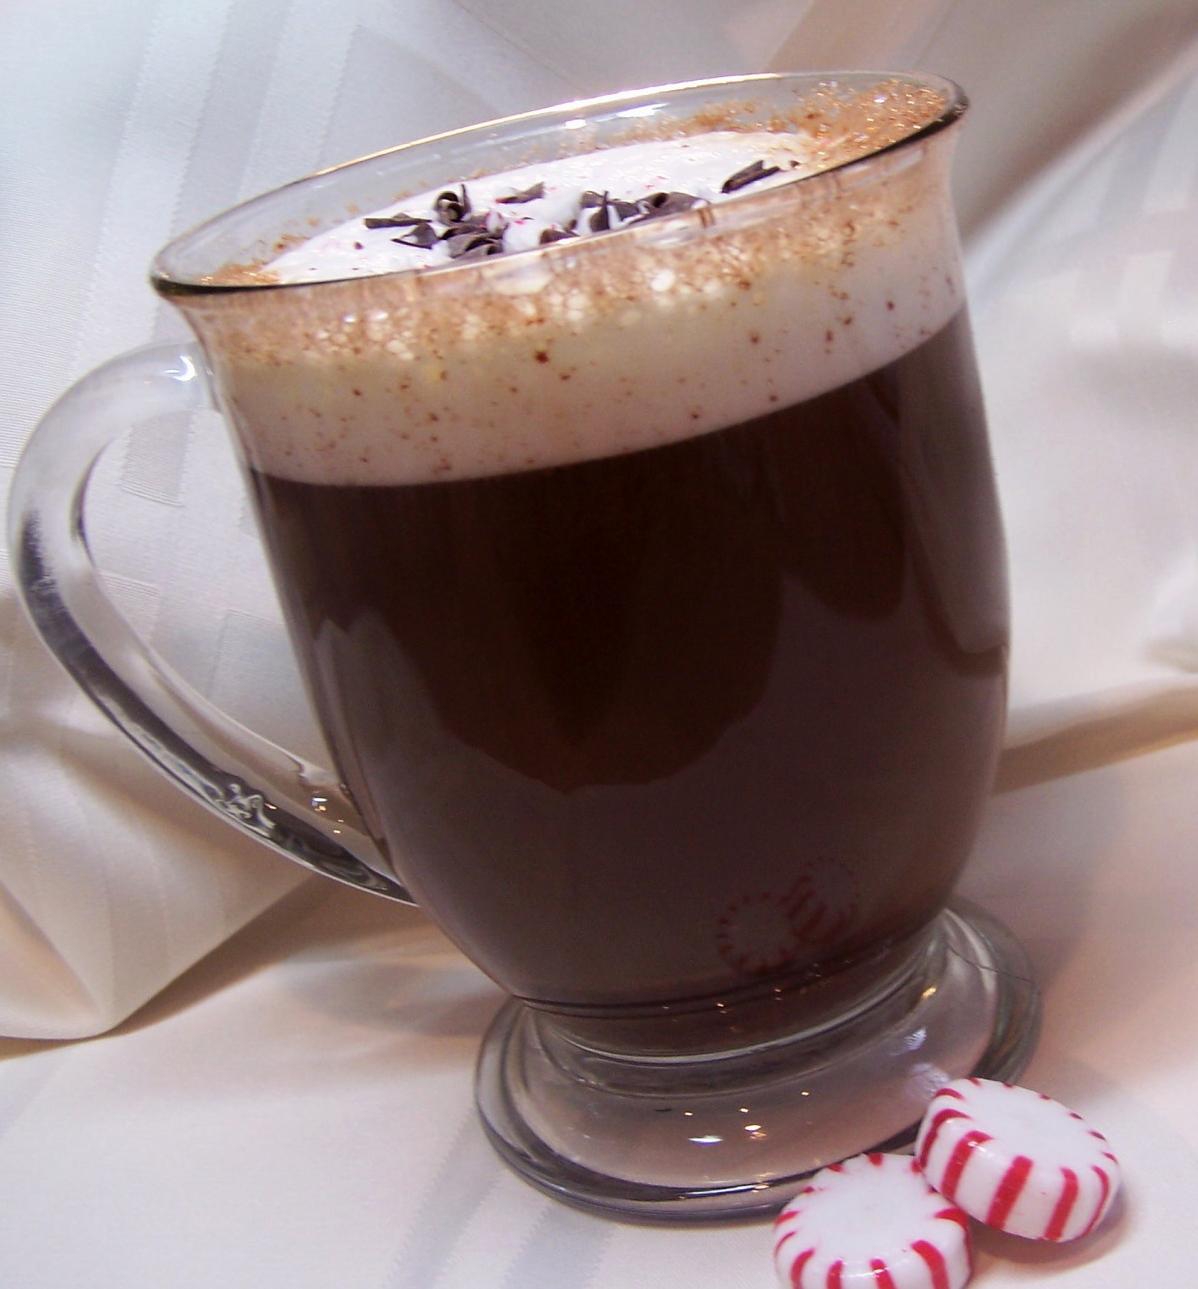  Don't settle for plain old coffee - add some chocolate to take it to the next level.